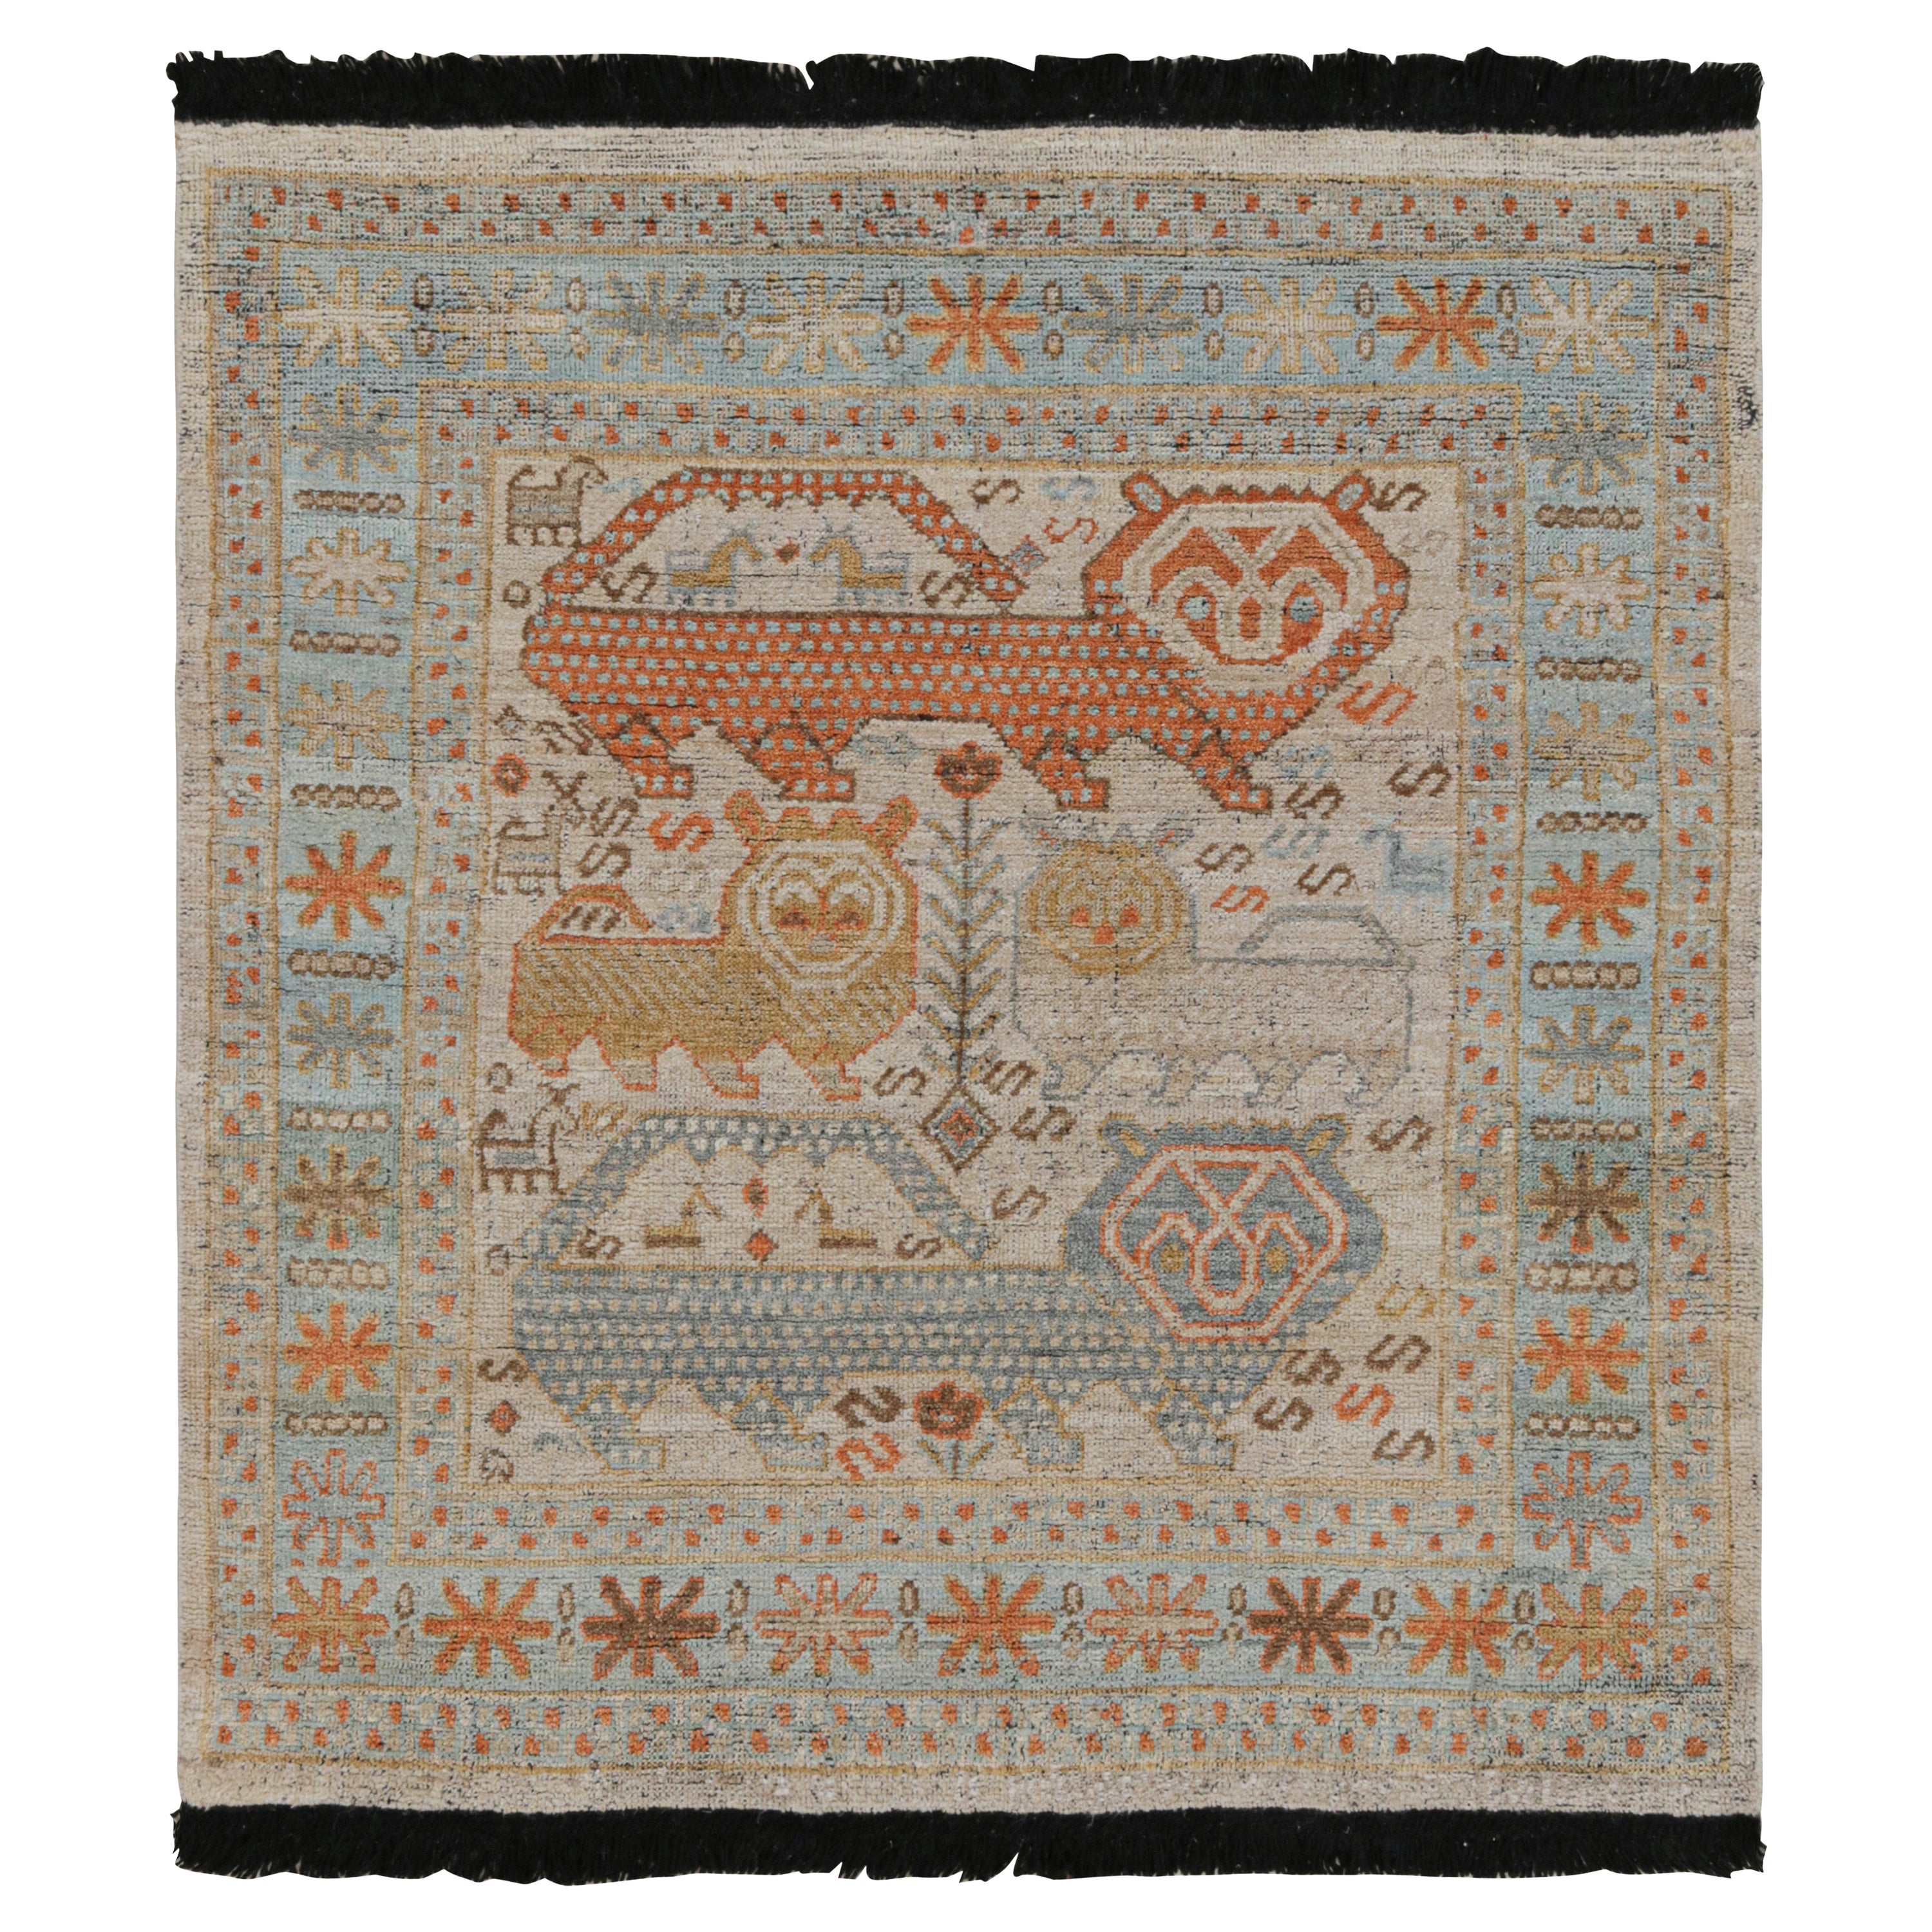 Rug & Kilim’s Tribal Style Rug in Polychromatic Lion Pictorial Patterns For Sale